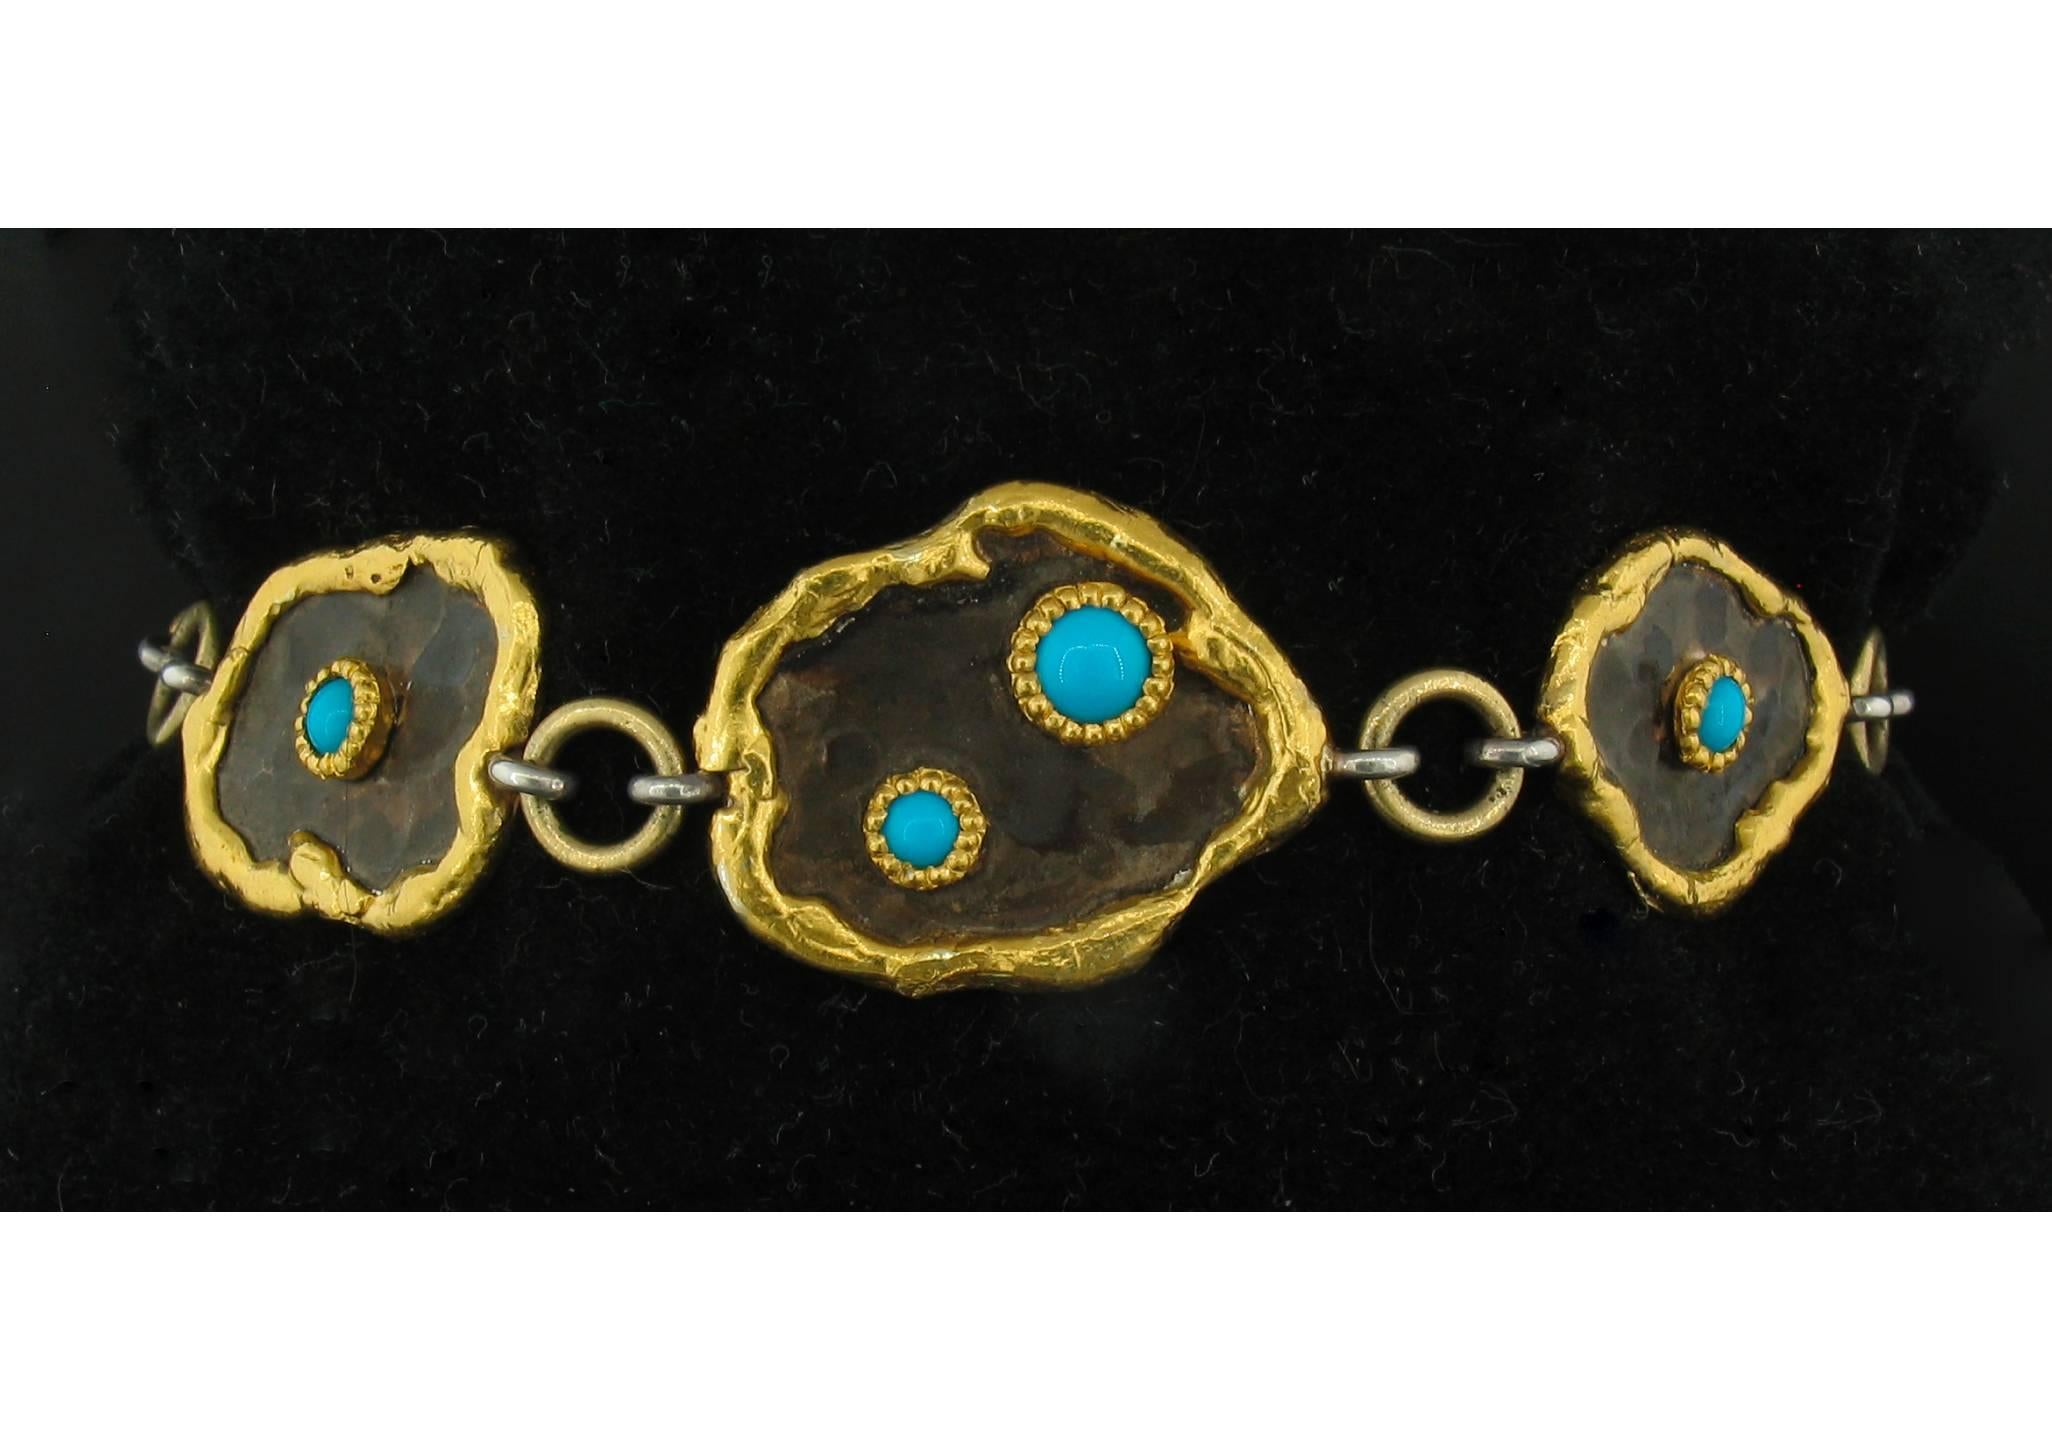 This Turquoise Link Bracelet was designed and made by well known designer Victor Velyan.  It contains 10 Turquoise cabochons weighing a total of 4.50 carats and are set in 24k gold and Silver.  The 'brown' is a proprietary patina hand painted and